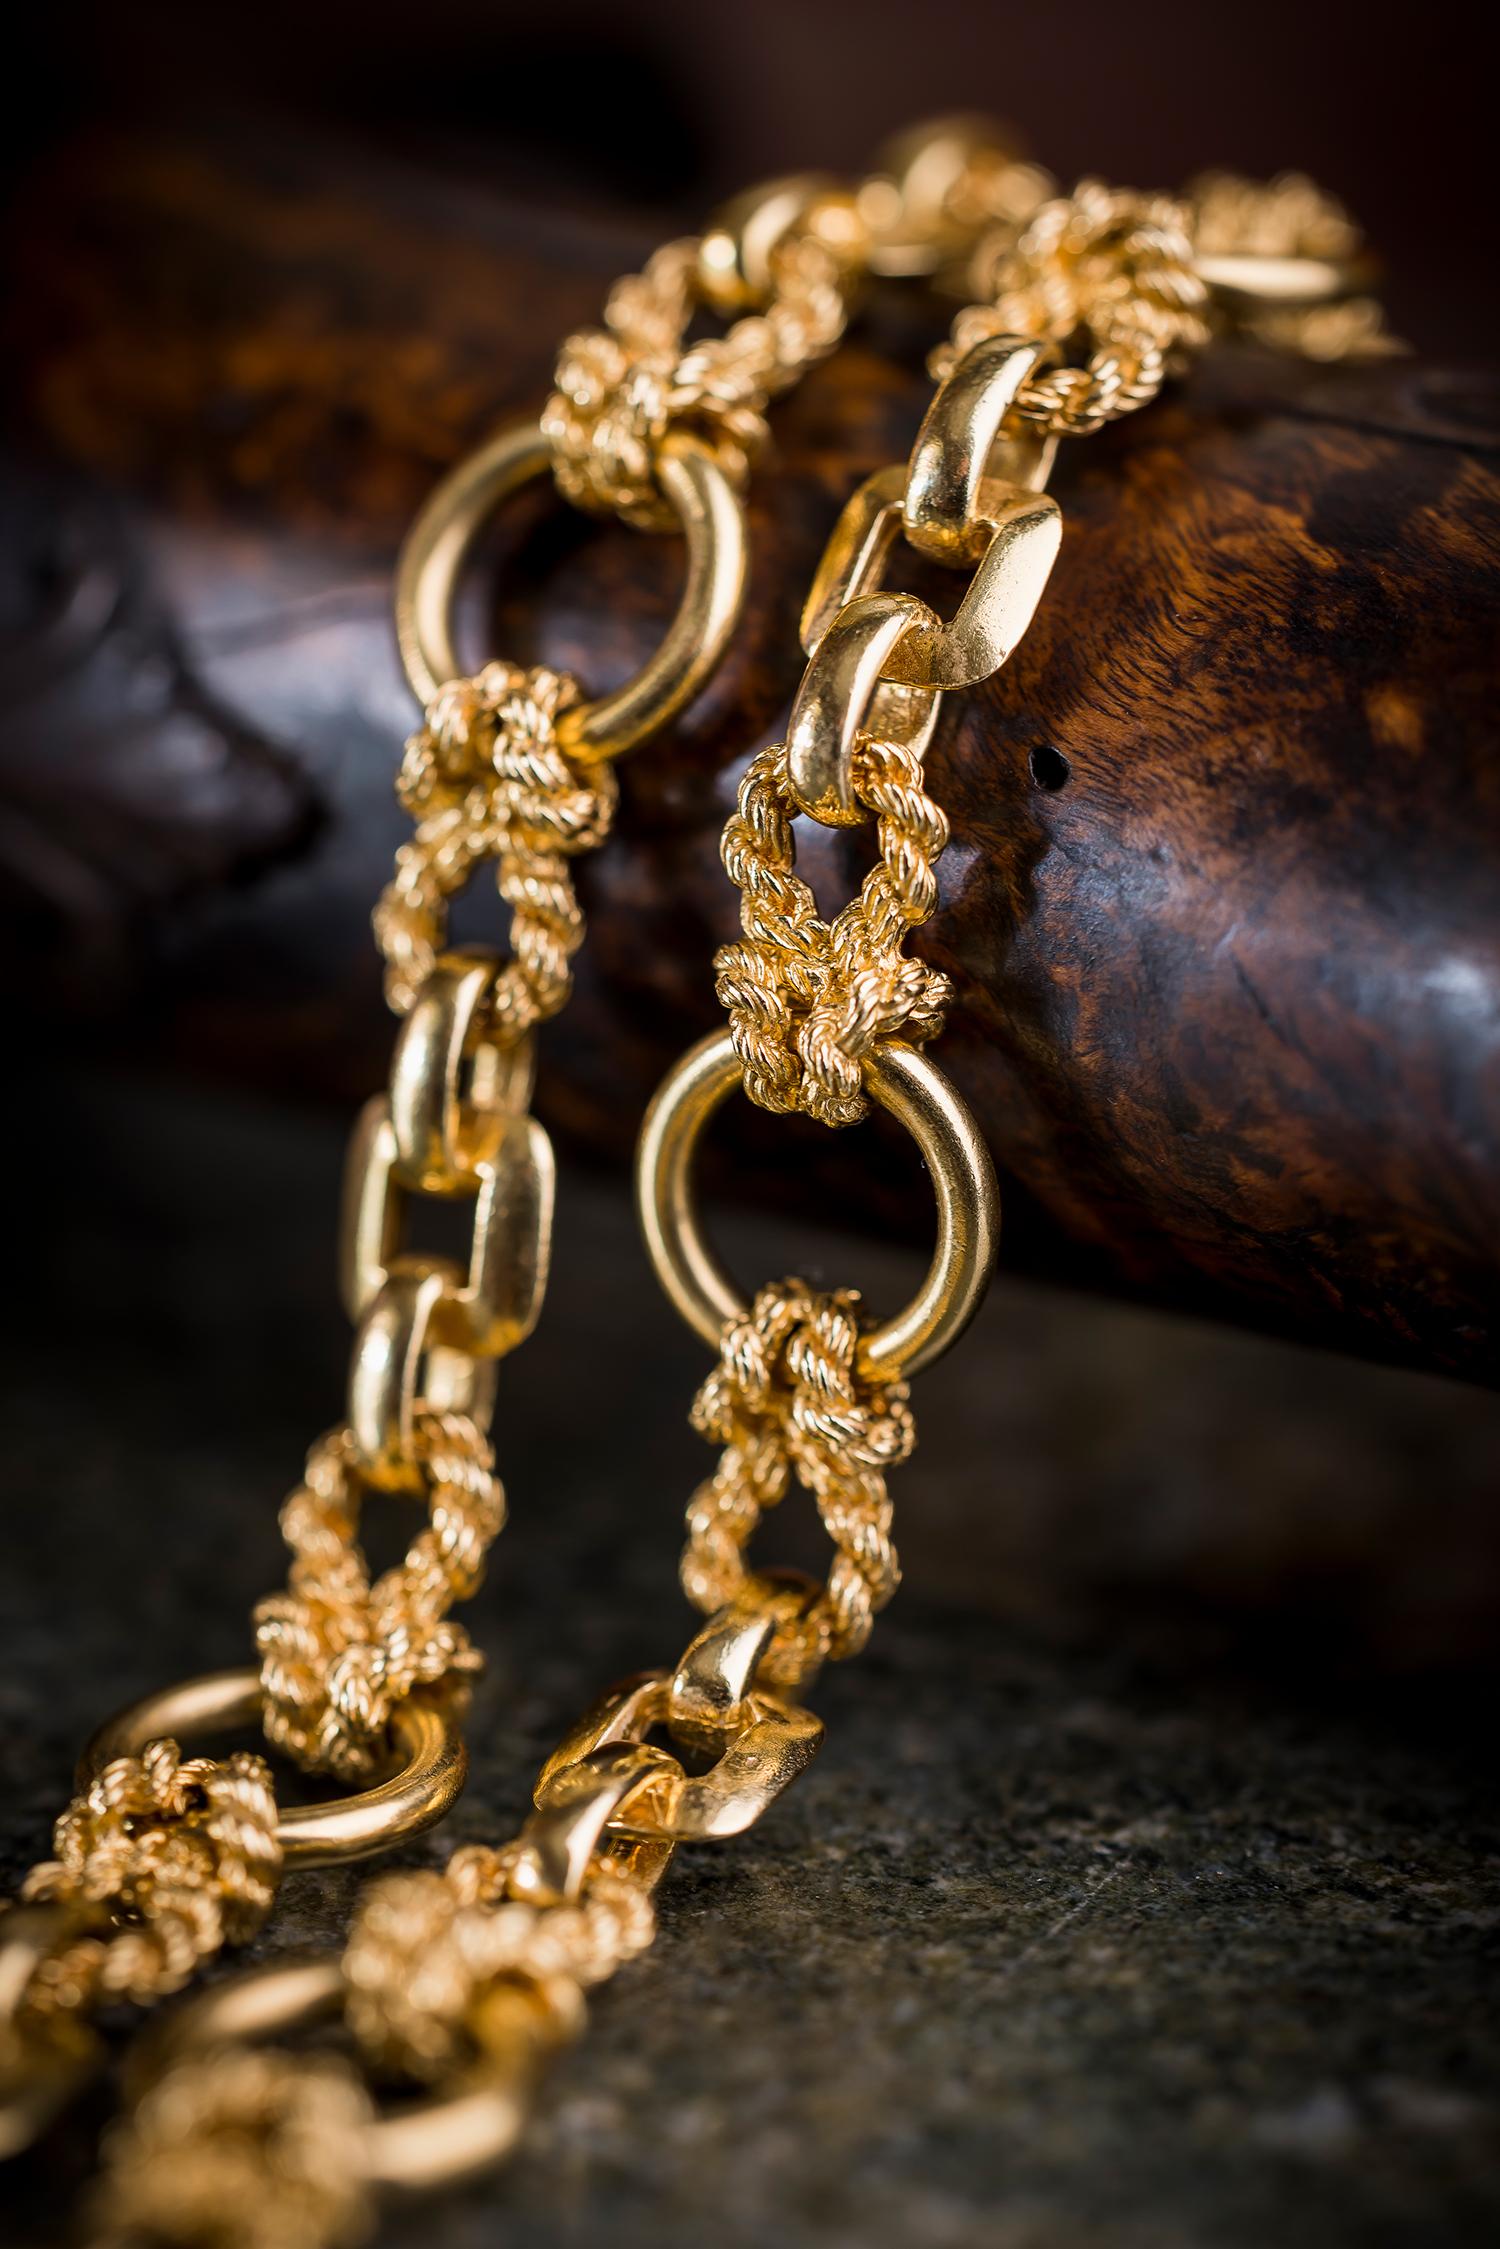 So very fab! 

Rare 18K Yellow Gold Nautical Rope Link necklace and bracelet set by Hermès

An 18 karat yellow gold necklace and bracelet set with rope-like links, a loop of twisted gold wire, the iconic Hermès knot motif, alternated with round